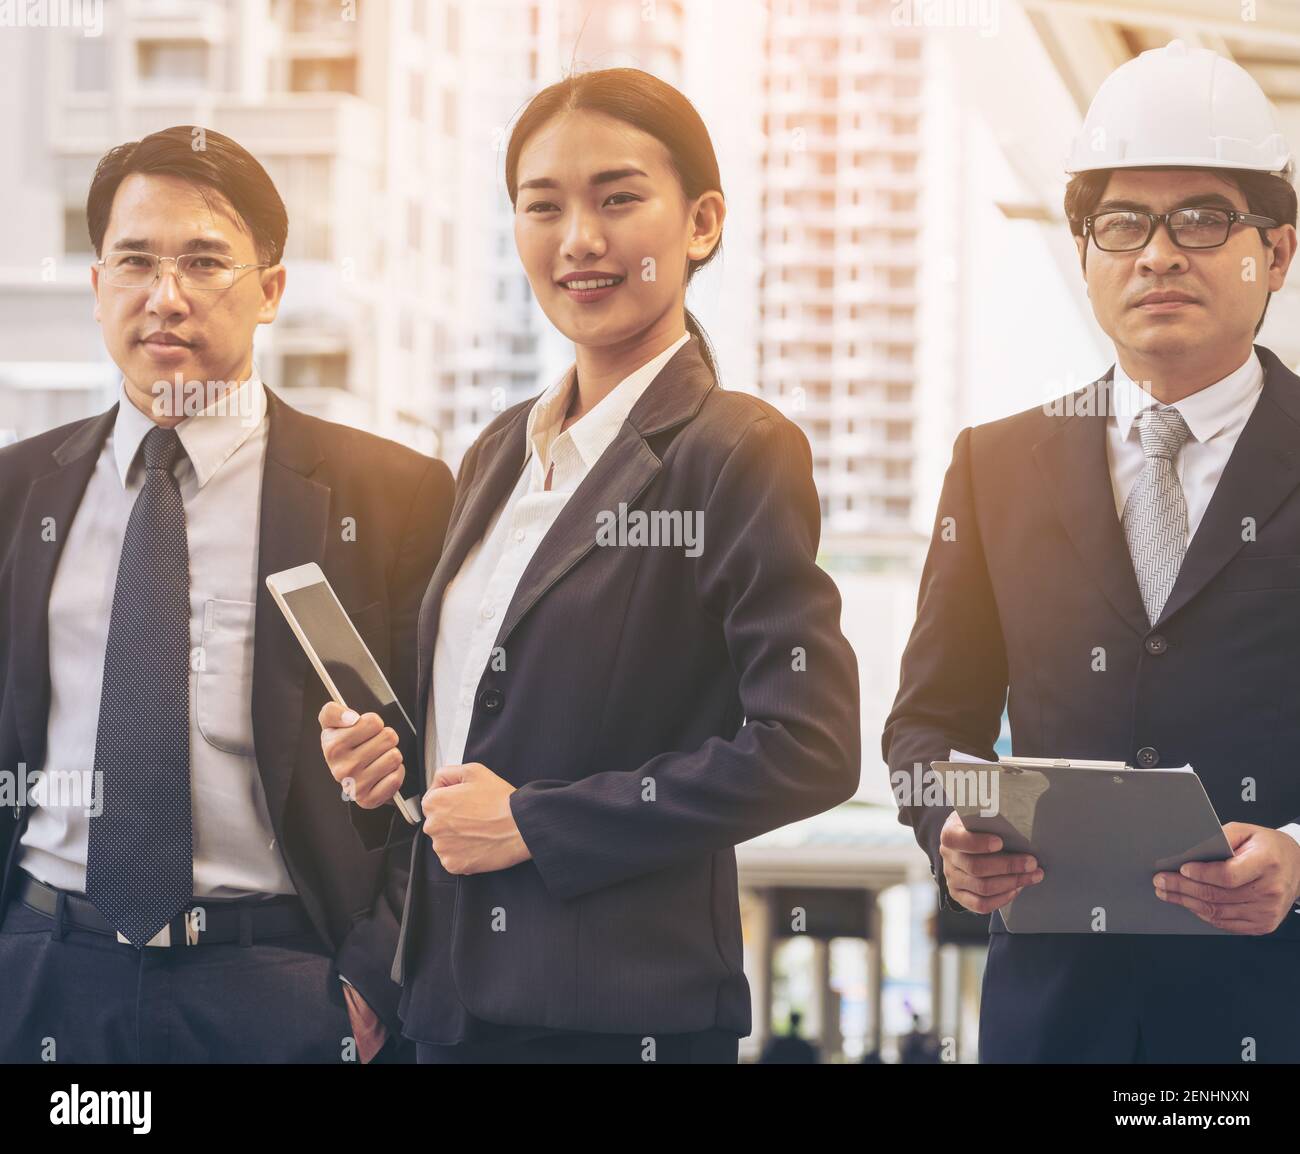 Woman leadership - Smart business woman standing with confidence in front of business men. Leadership of woman concept. Stock Photo